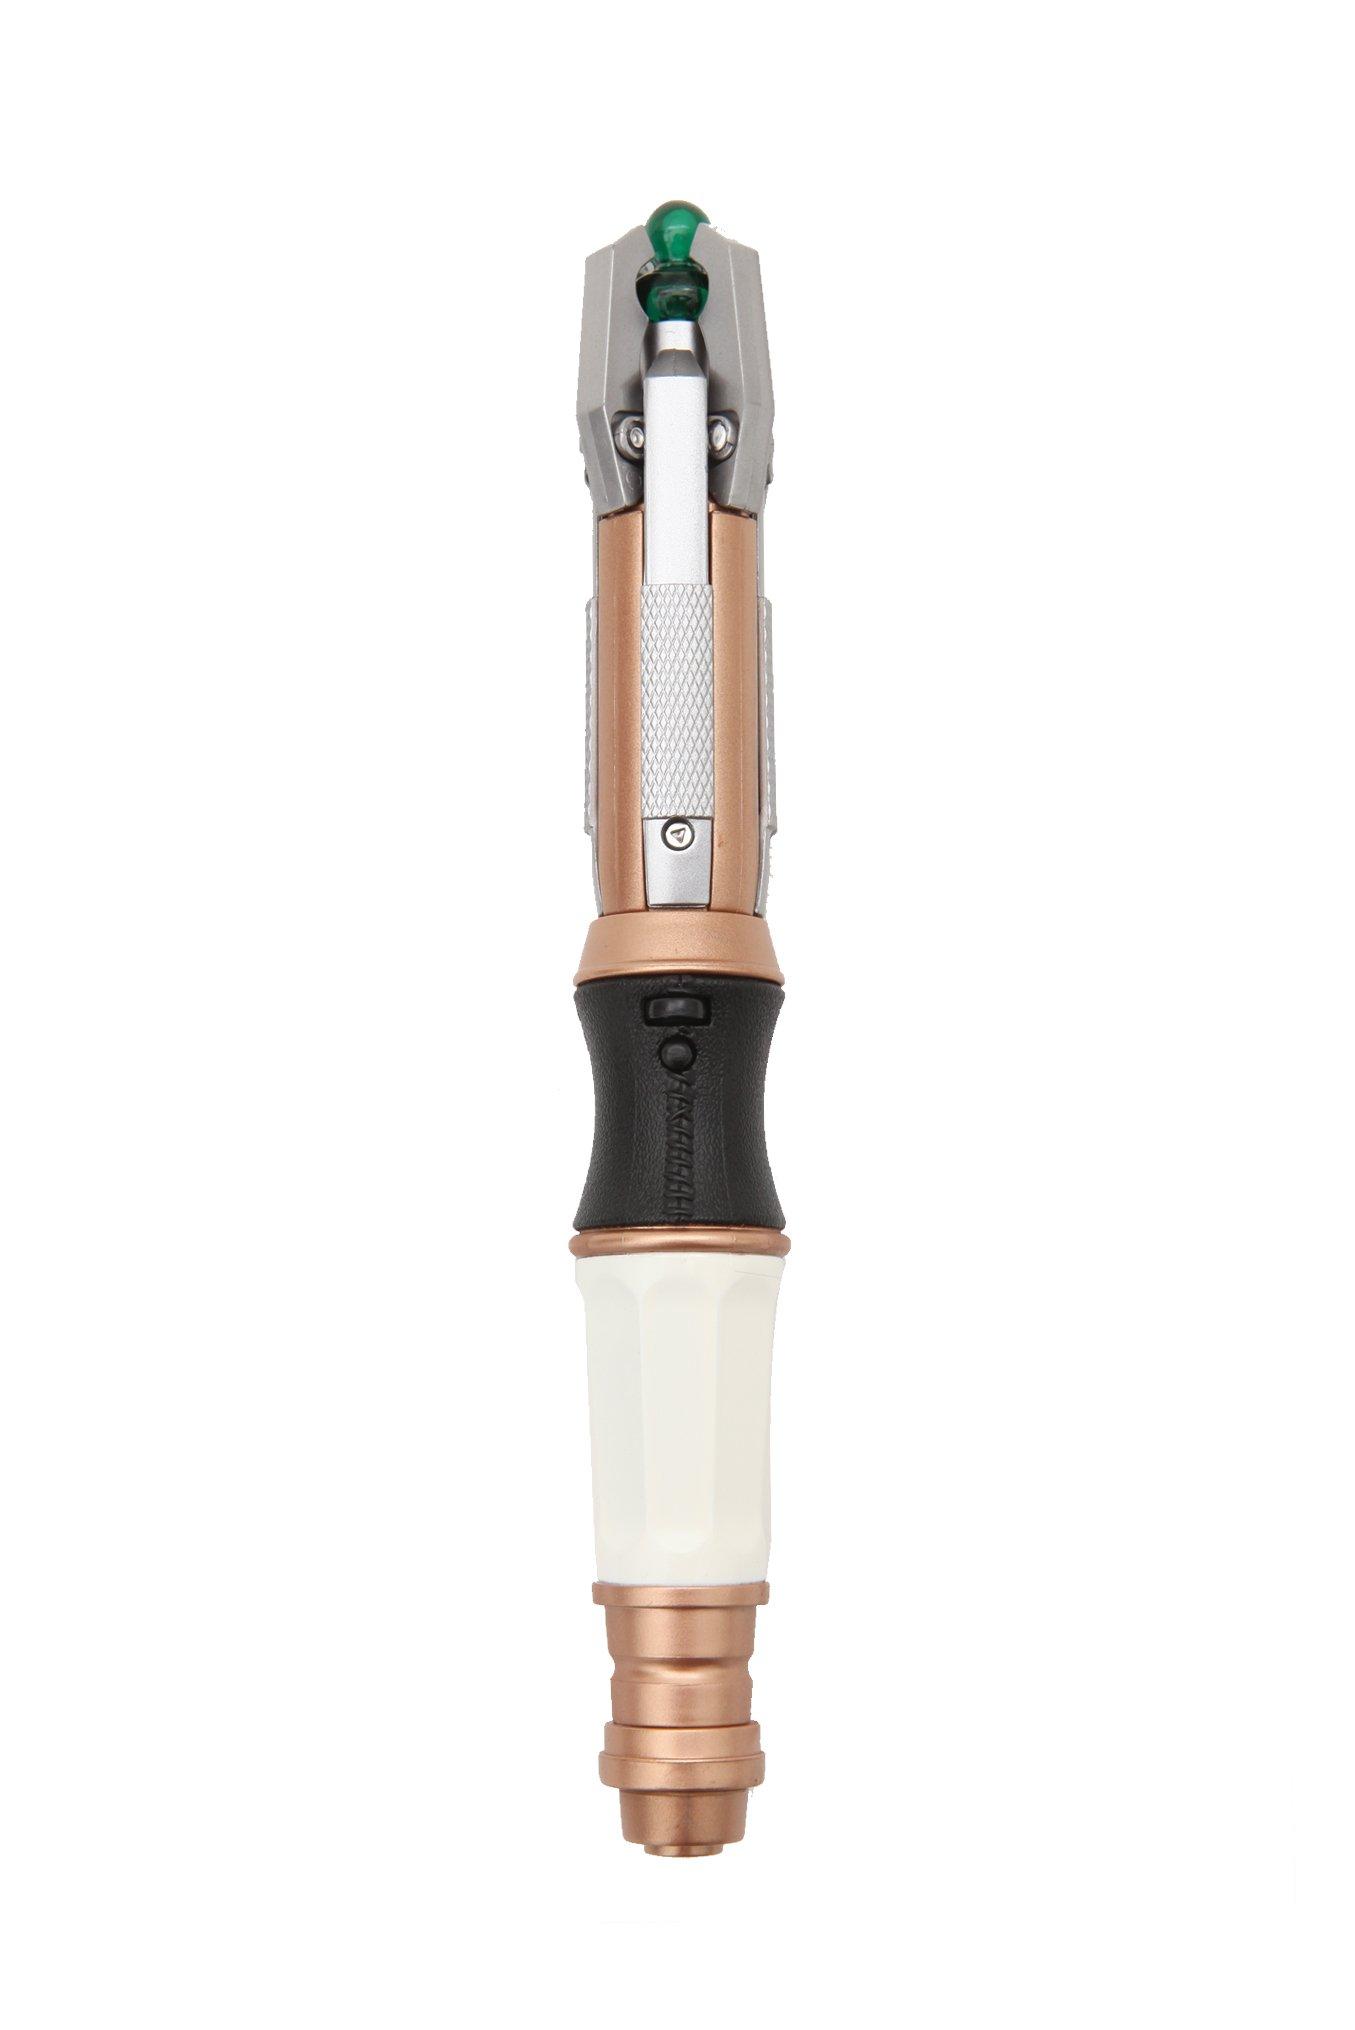 Limited Edition Exclusive The14th Doctor's Sonic Screwdriver – Merchandise  Guide - The Doctor Who Site